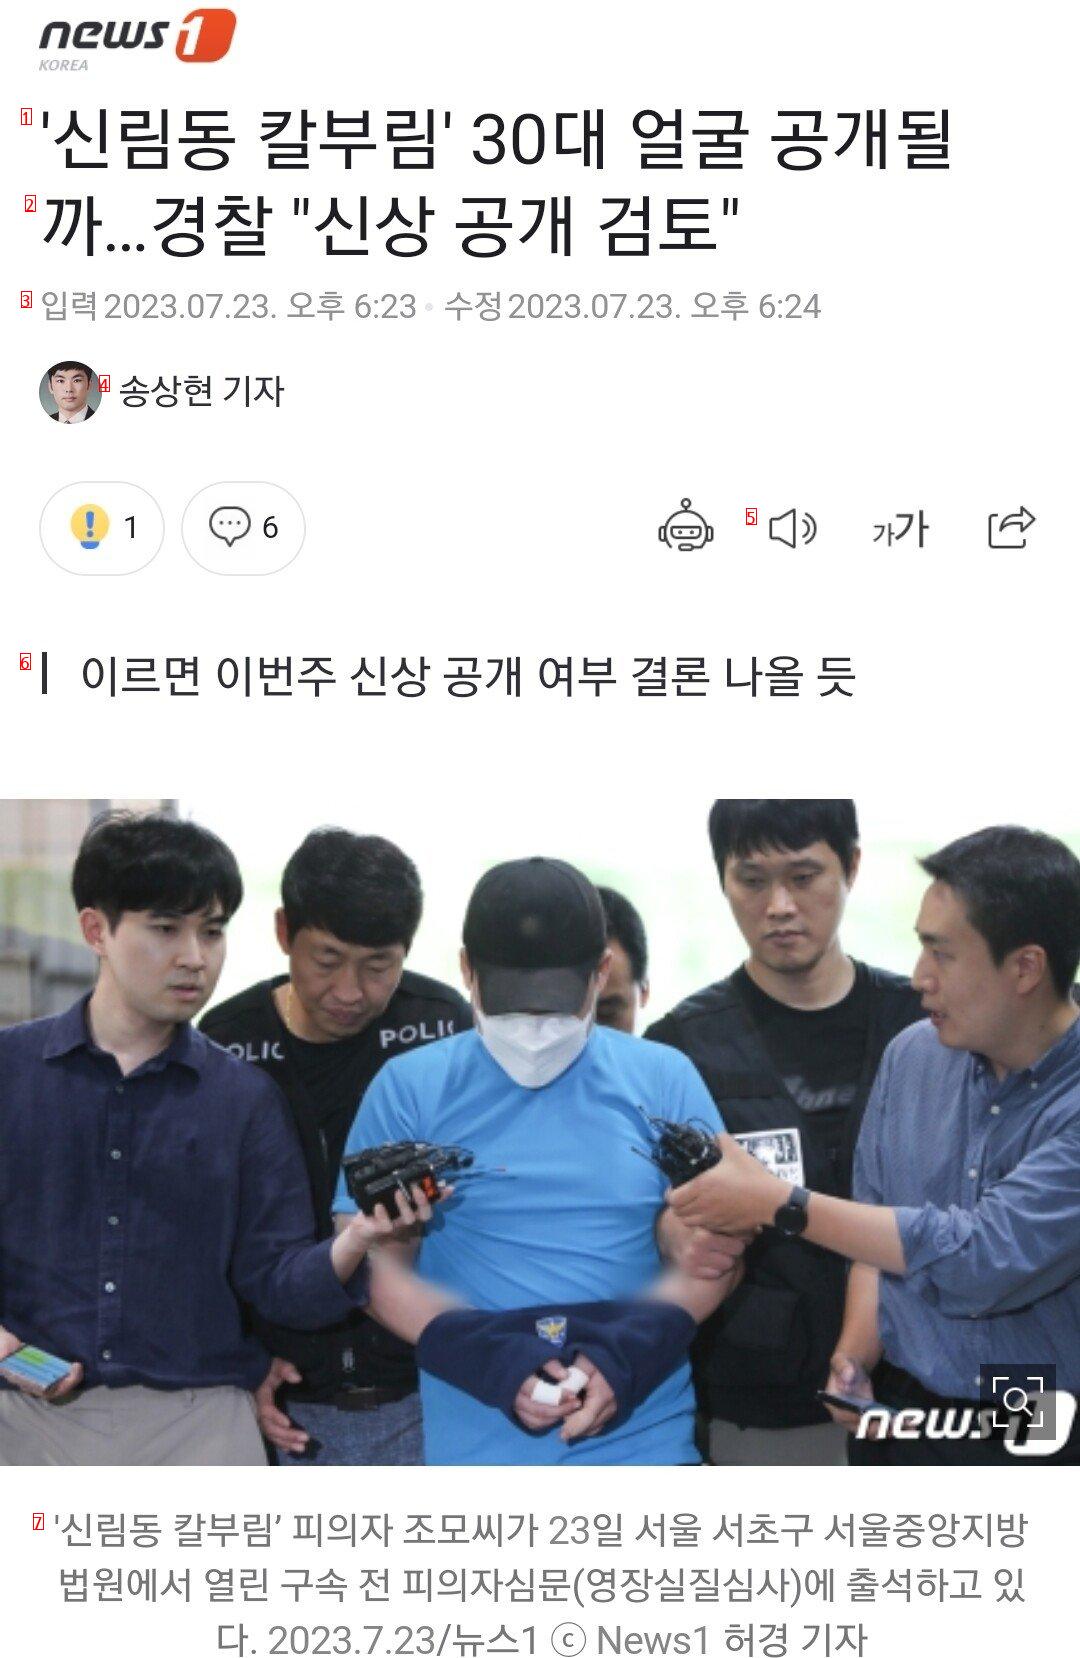 Review of Shinlim Suspect's Personal Information